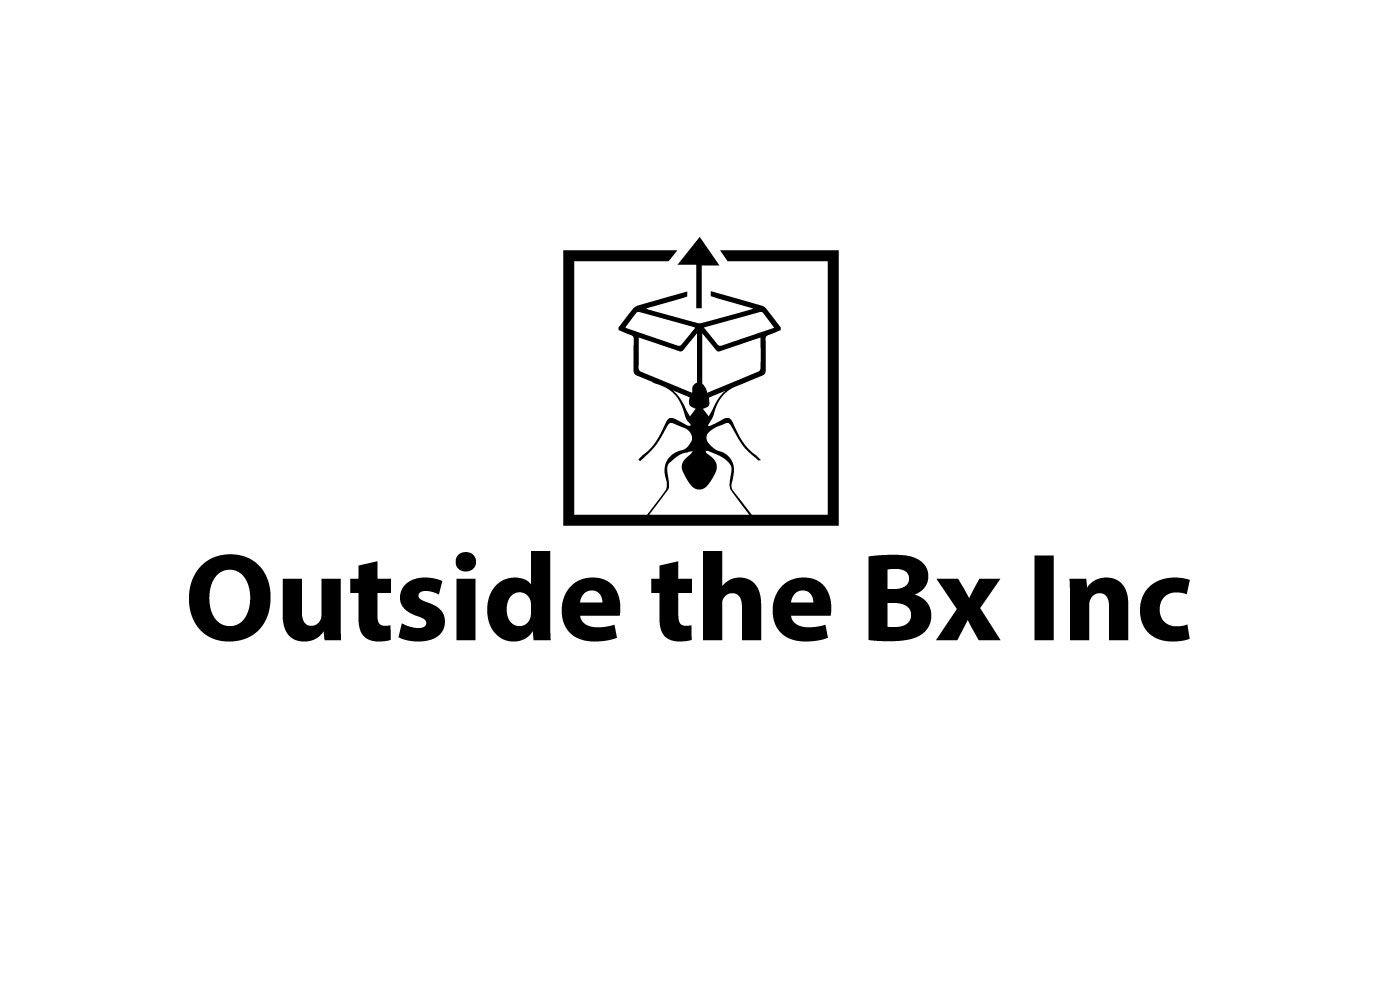 BX Company Logo - Modern, Bold, It Company Logo Design for OTBx and Outside the bx ...